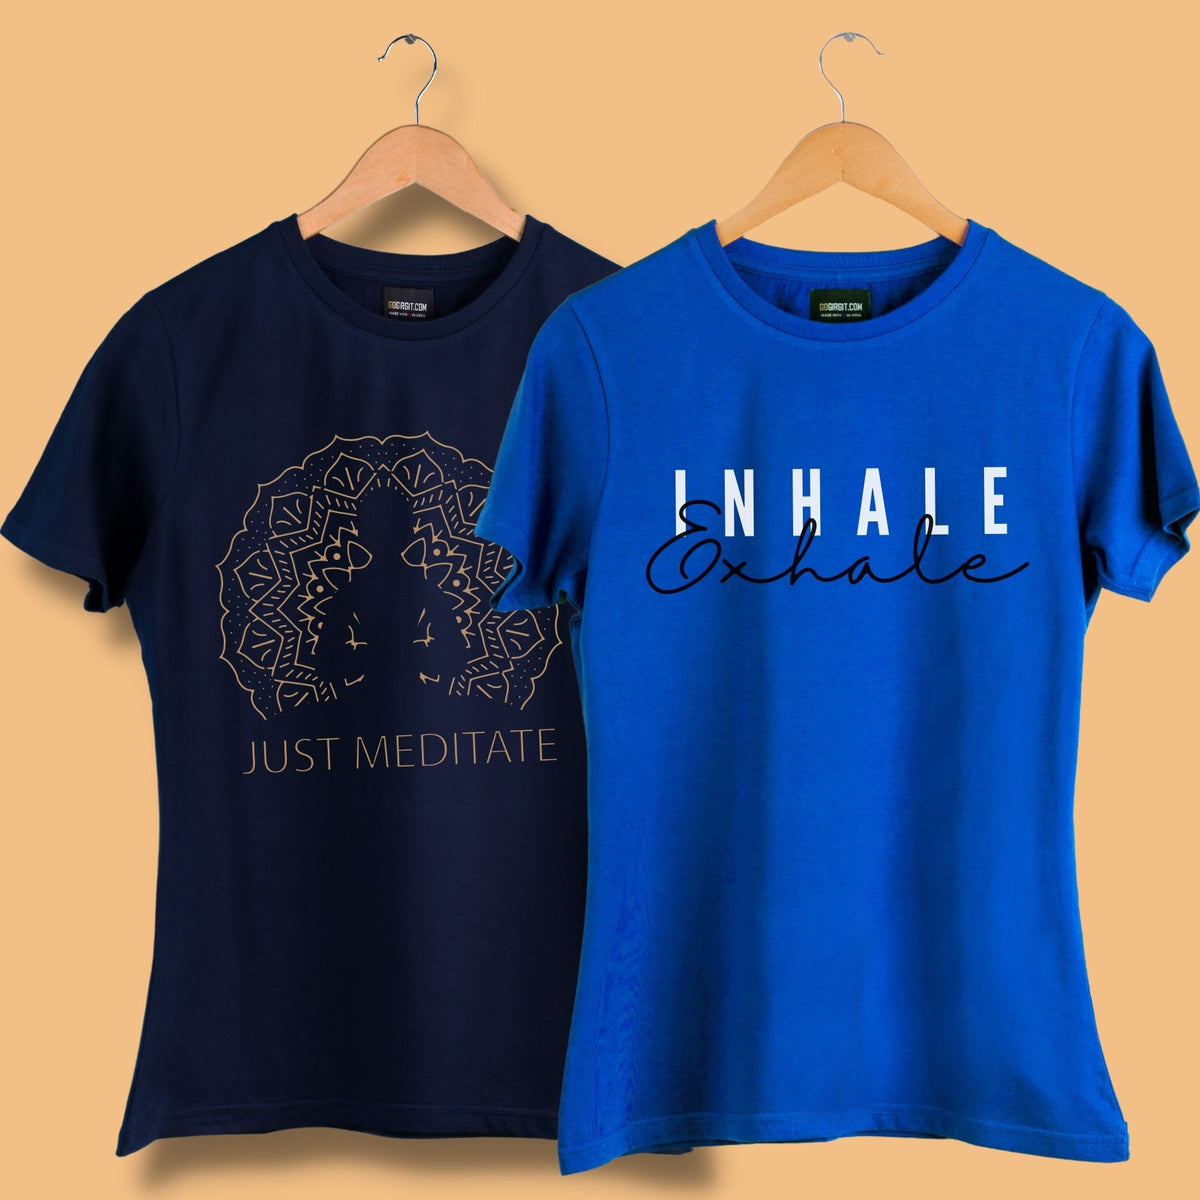 pack-of-2-women-s-printed-t-shirts-in-just-meditate-navy-blue-inhale-royal-blue-design-tshirt